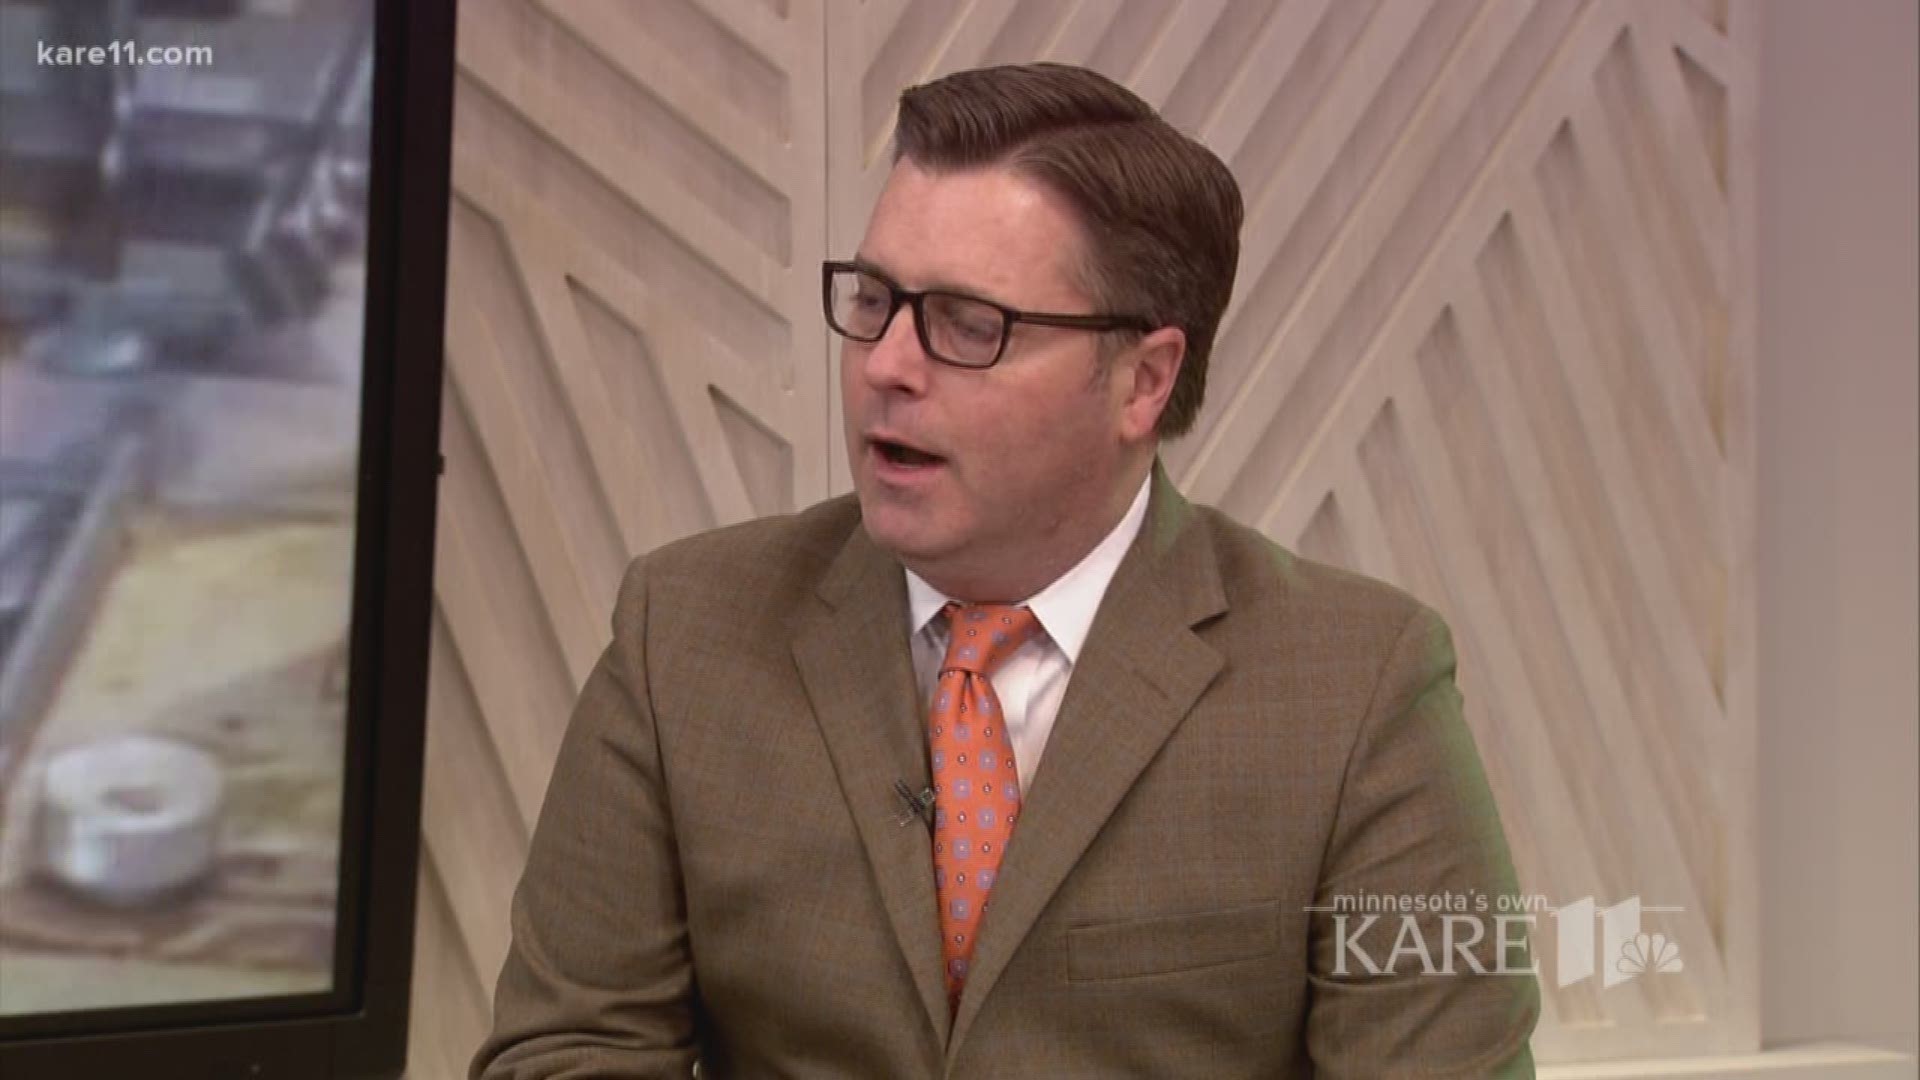 Dan Ament, financial advisor with Morgan Stanley, shares some financial tips for Gen X. http://kare11.tv/2FOgitH